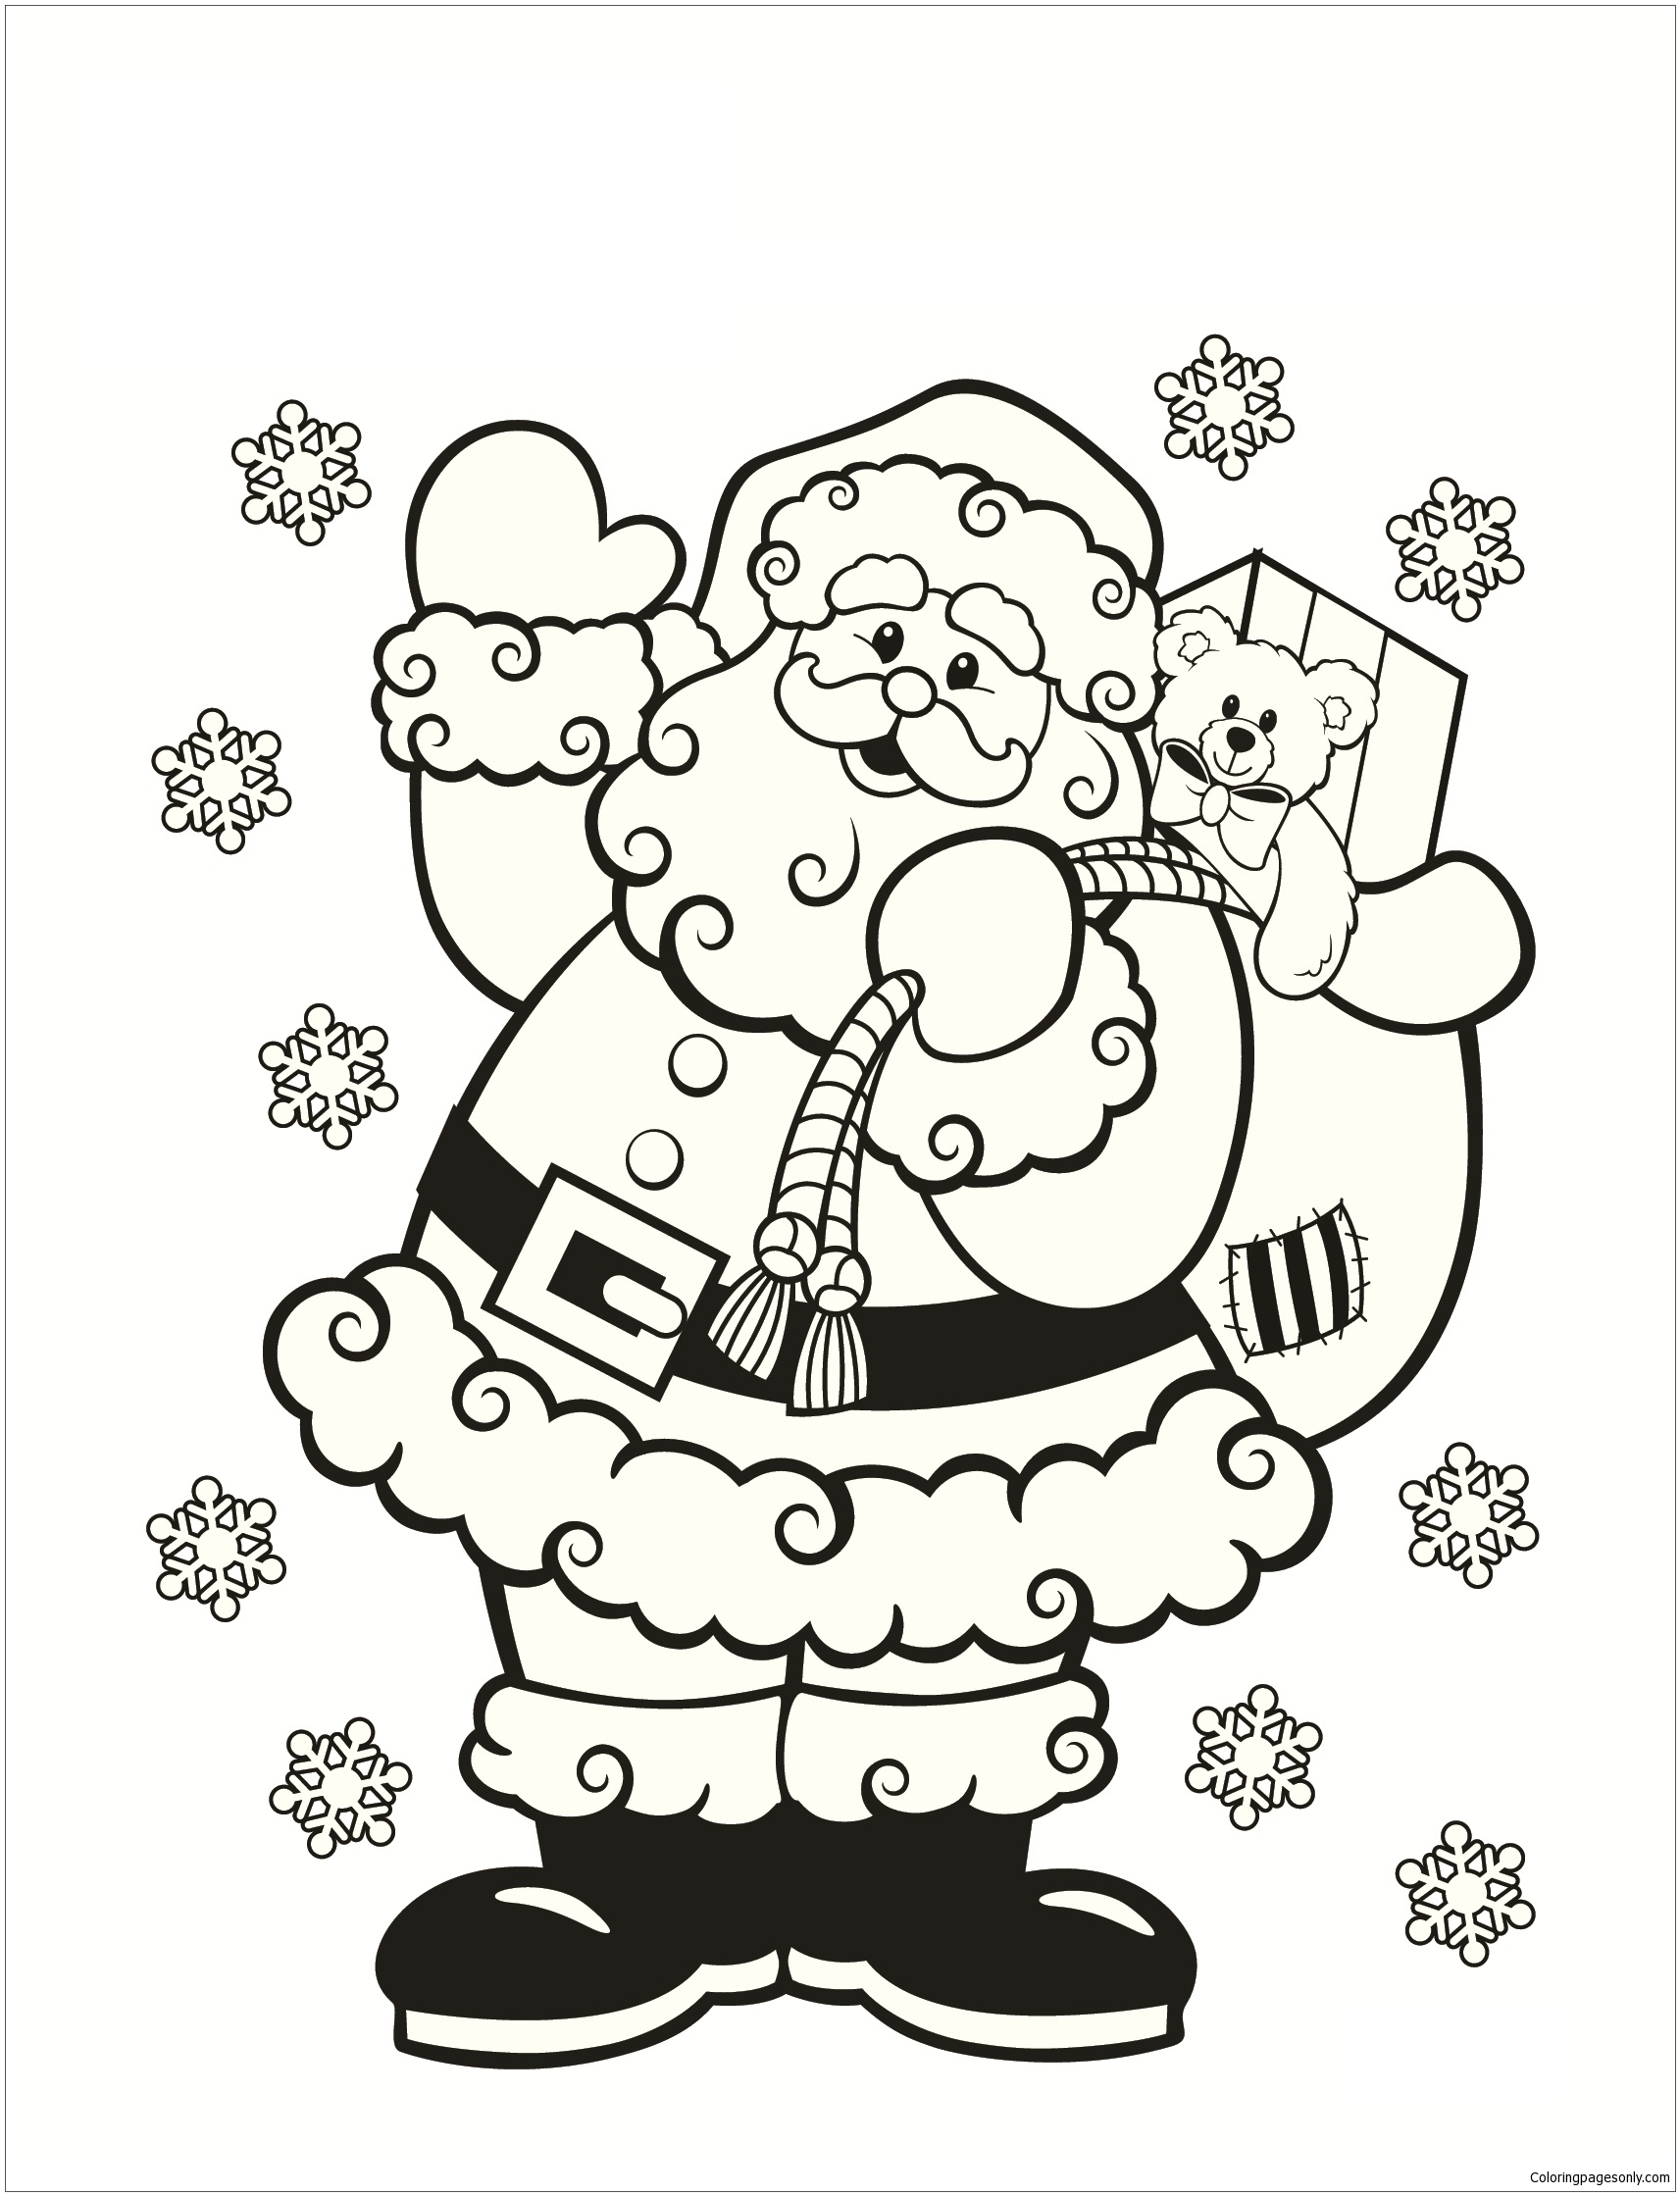 Santa Coloring Pages Christmas Coloring Pages Coloring Pages For